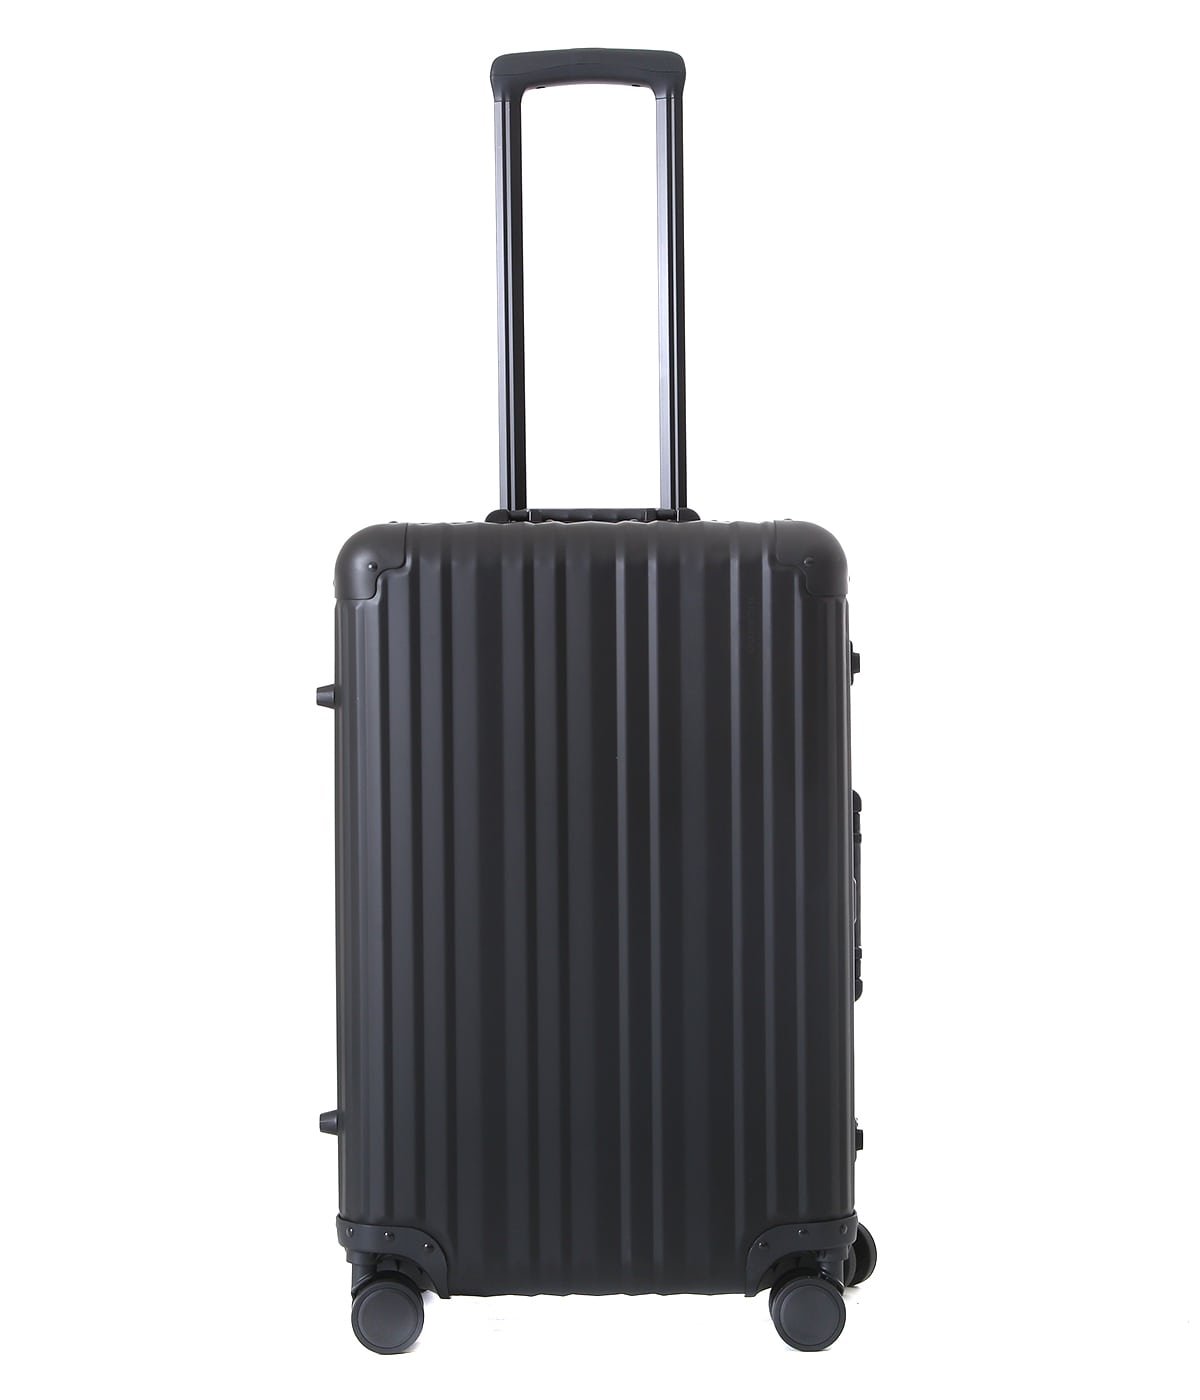 Aileron 24-inch Spinner Suitcase | RICARDO(リカルド) / バッグ 